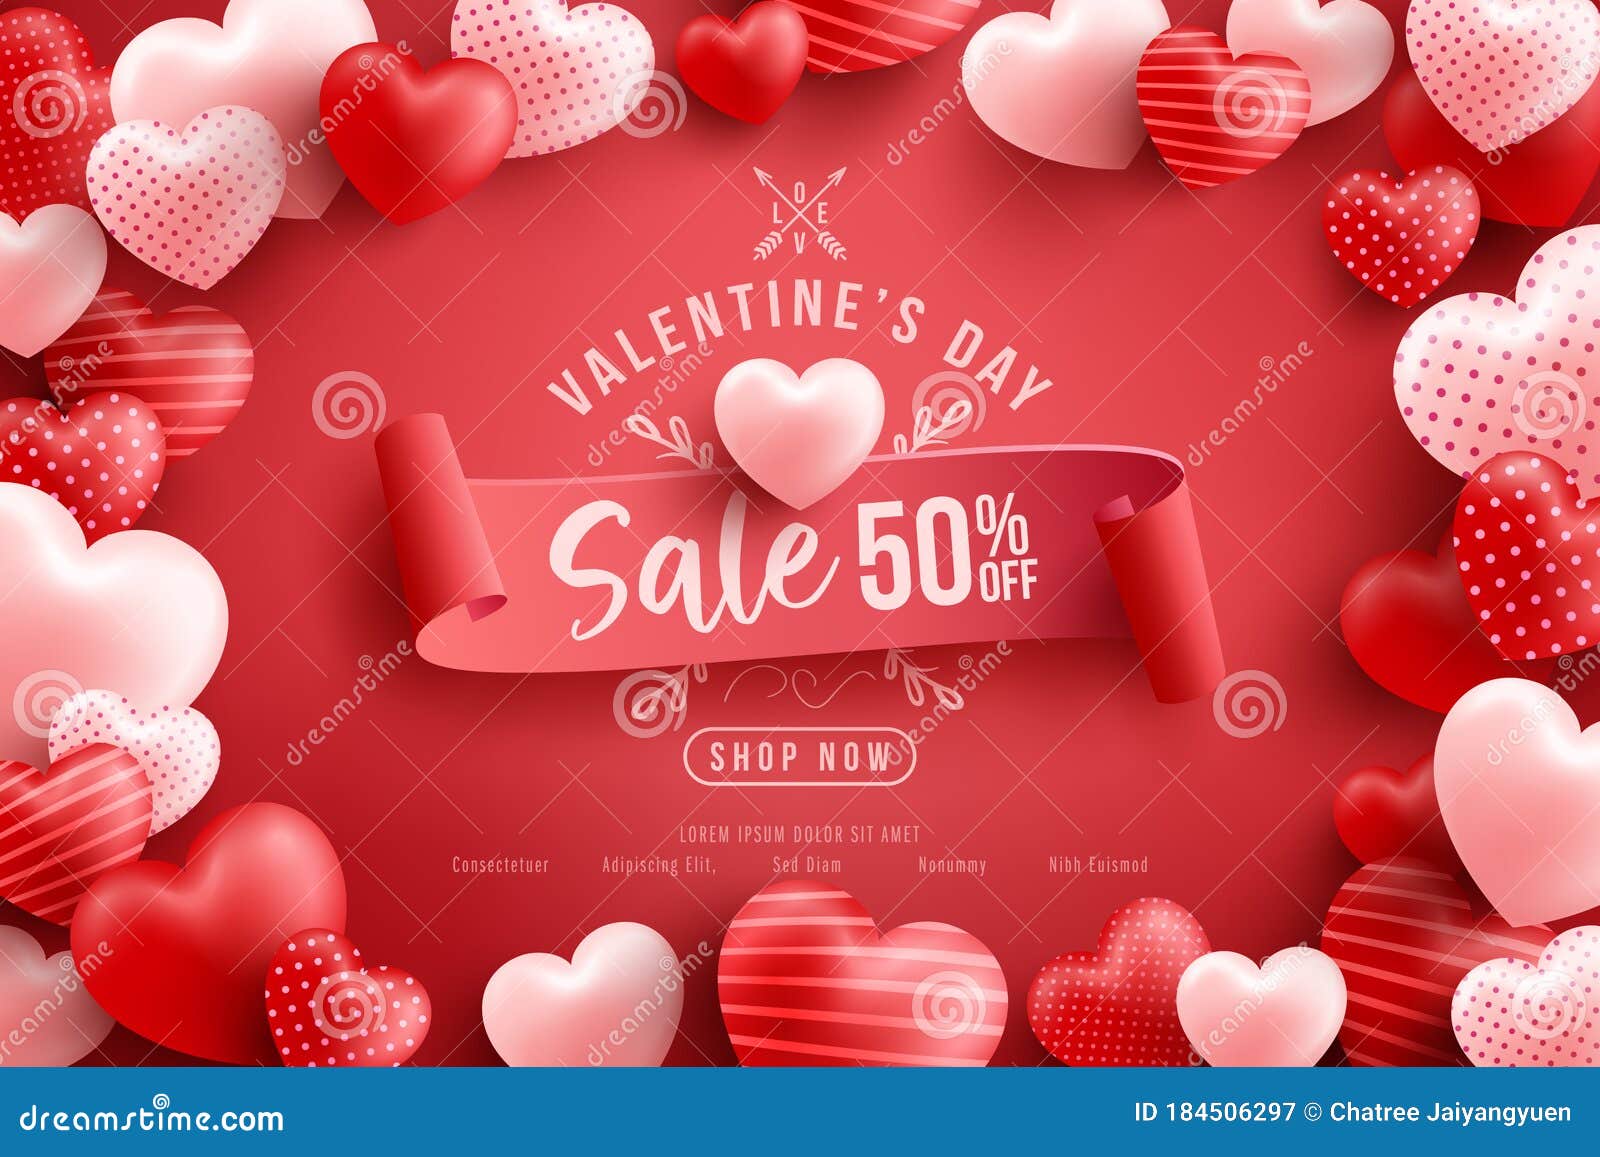 valentine`s day sale 50% off poster or banner with many sweet hearts and on red background.promotion and shopping template or